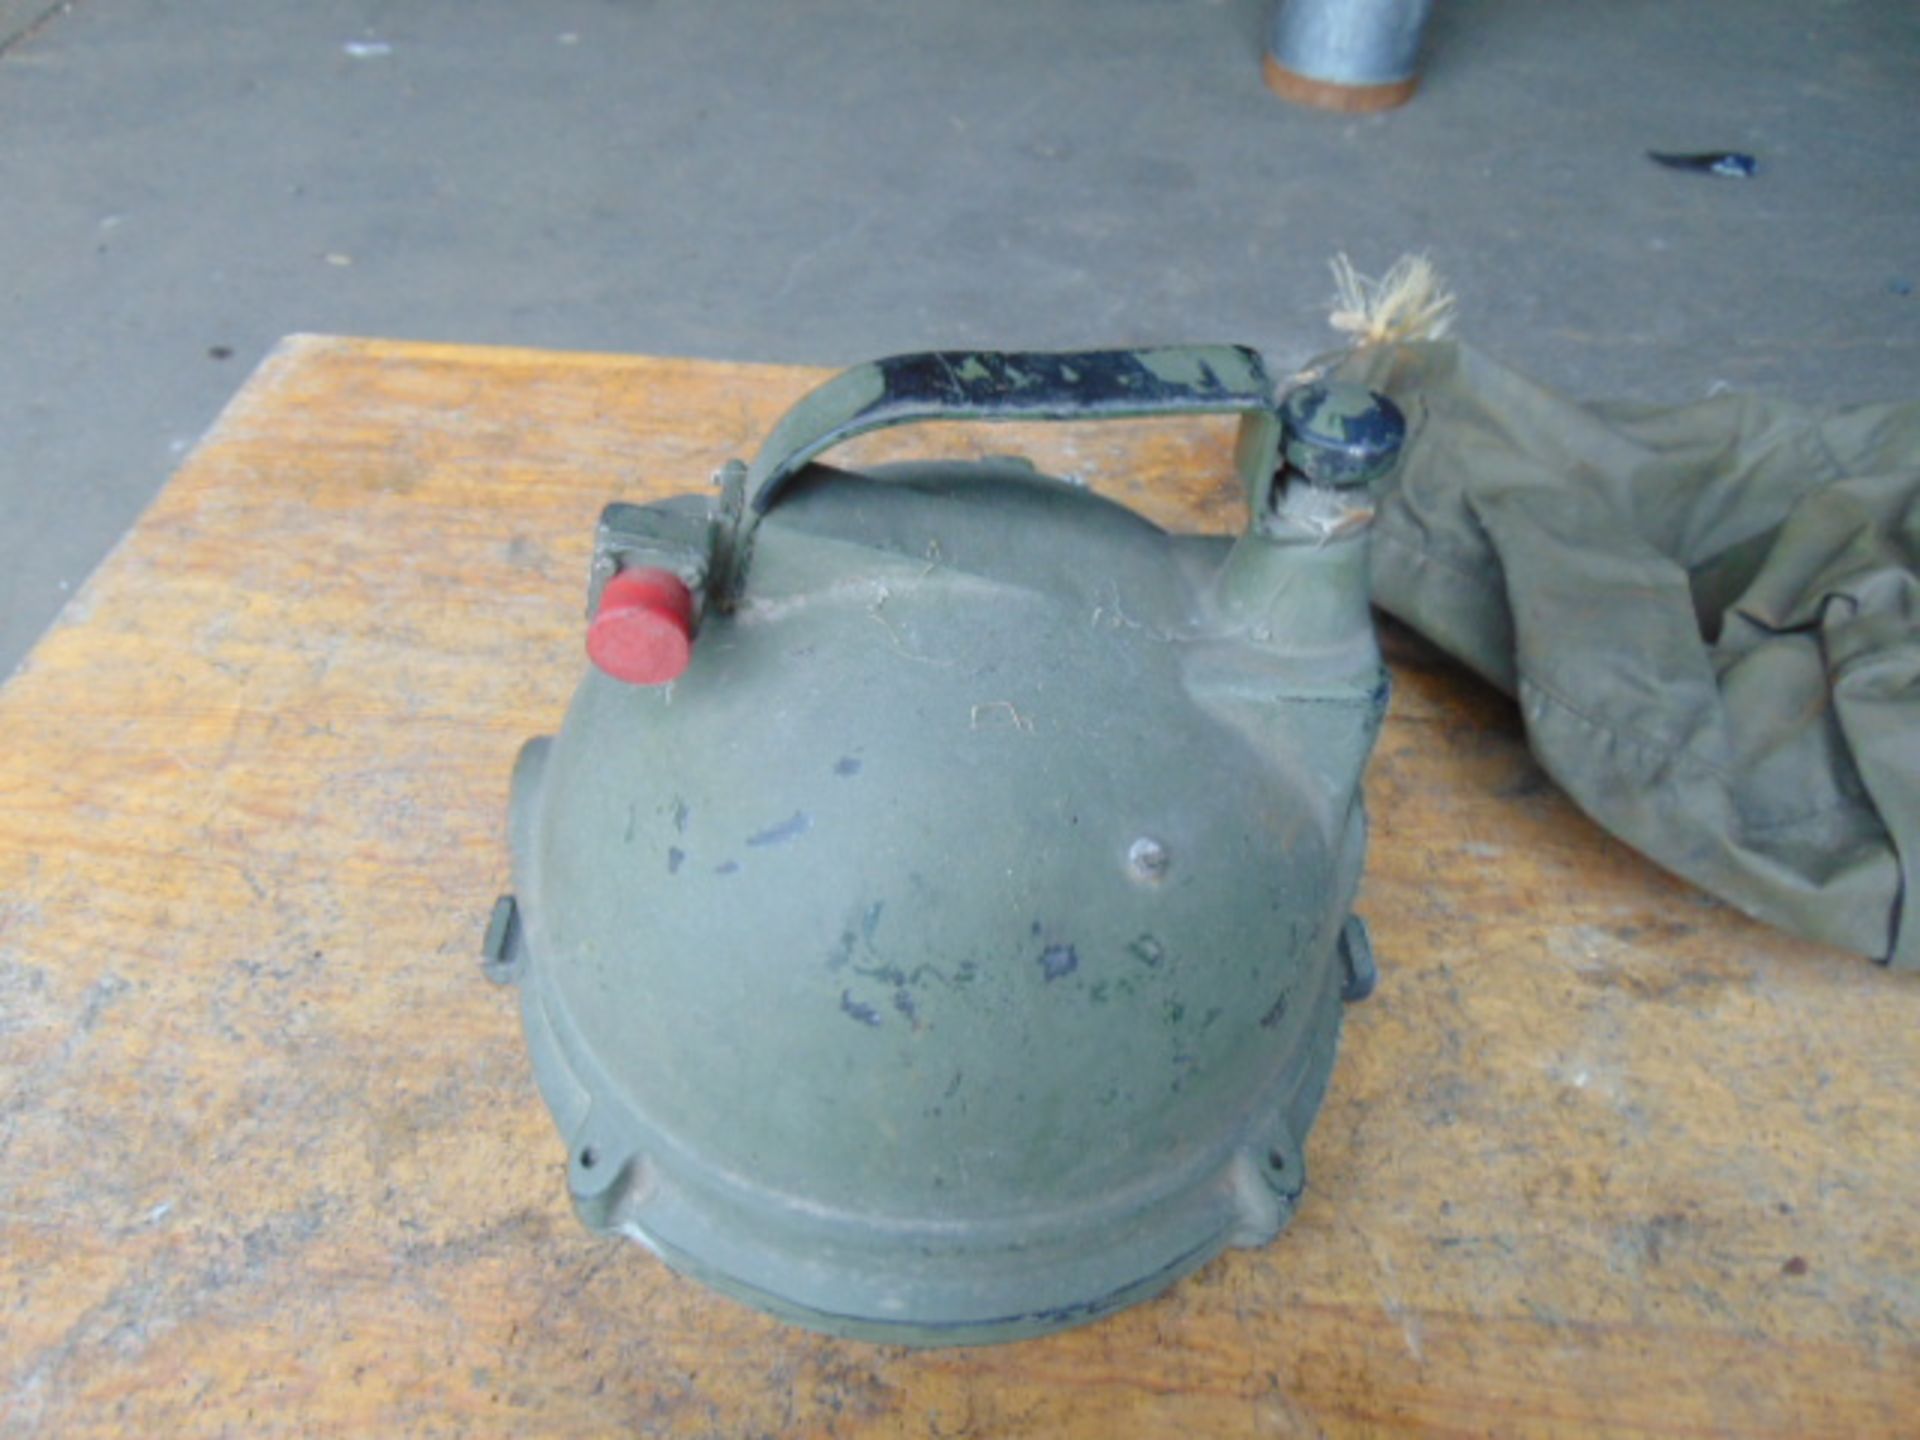 FV Heavy Duty Vehicle Mounted Search Light with cover - Image 6 of 8